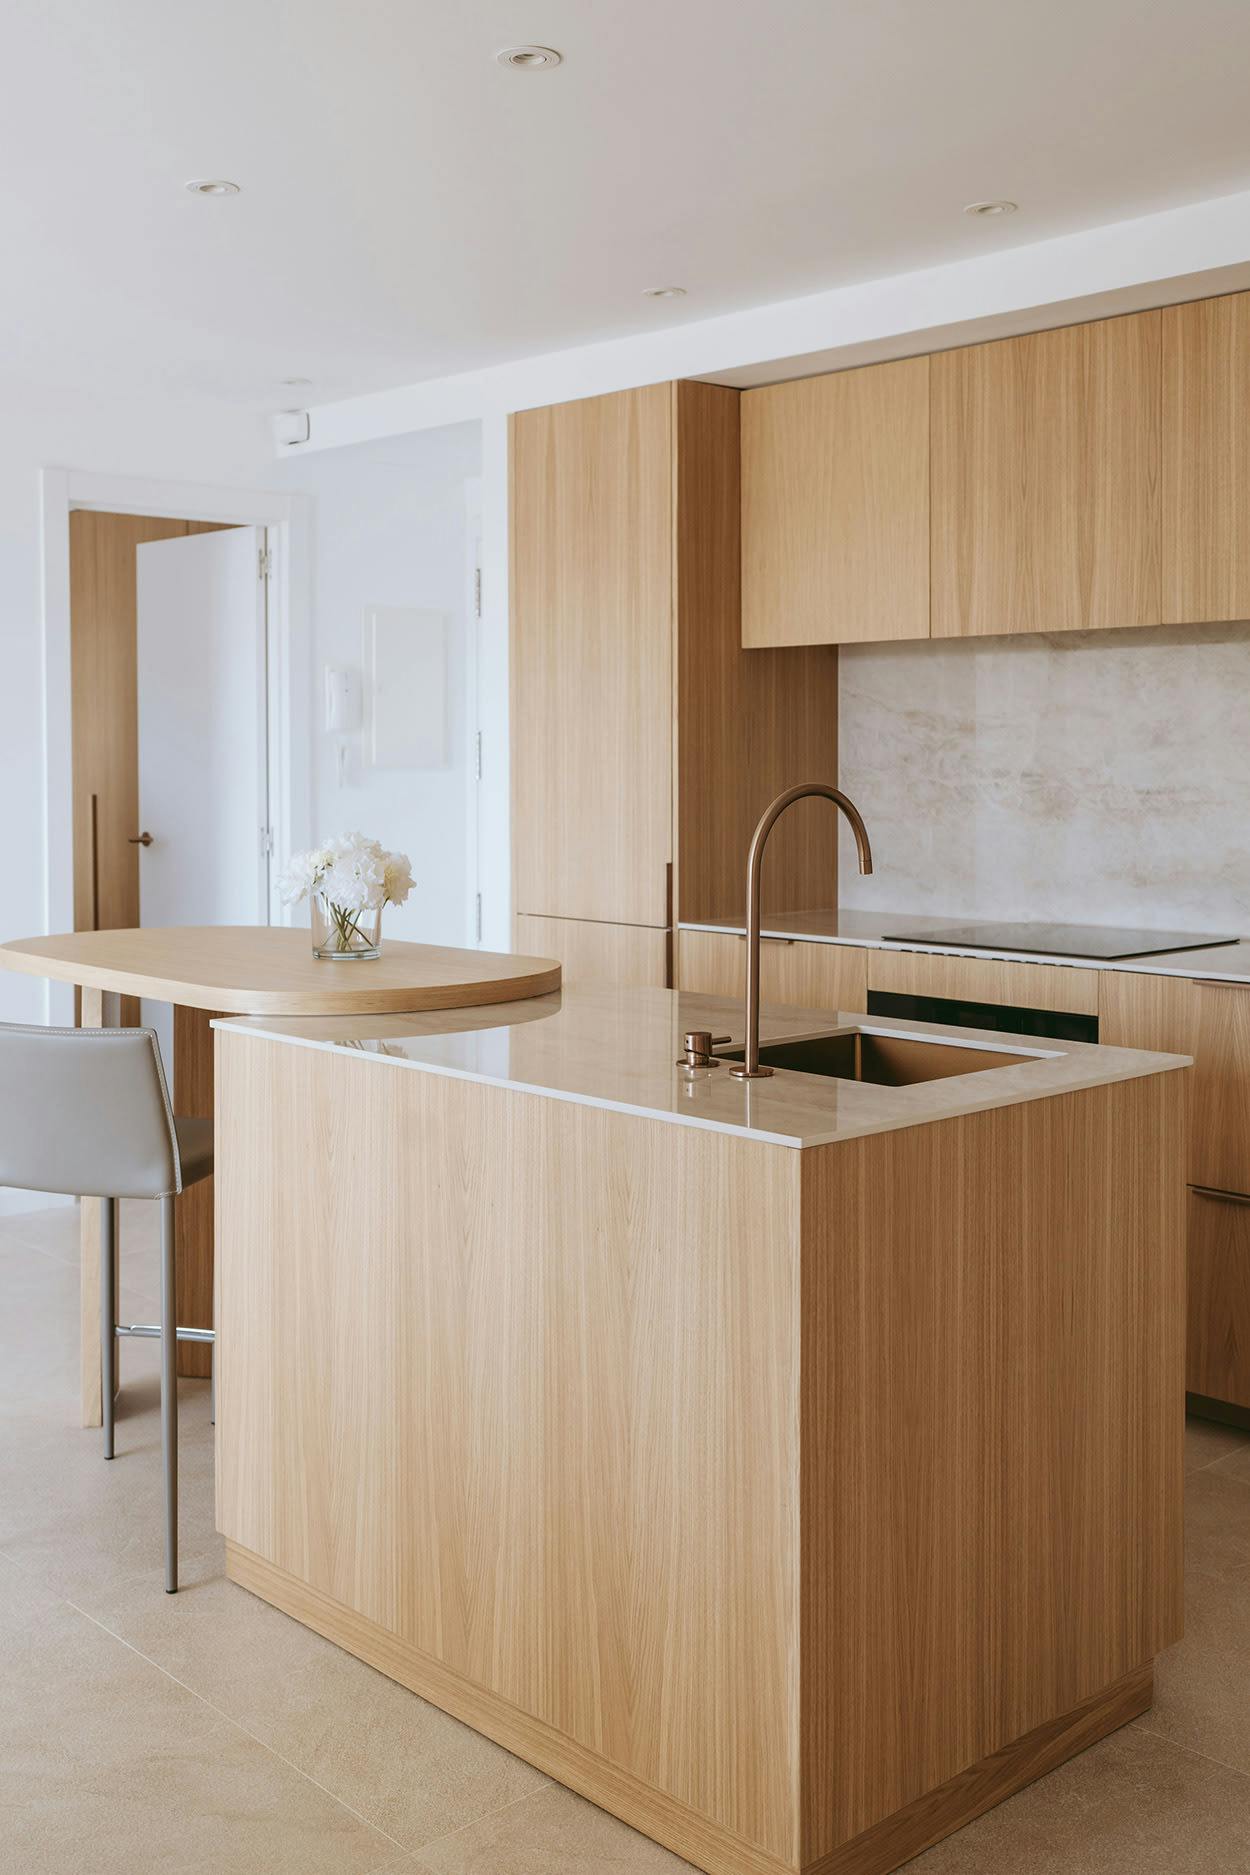 The image features a modern kitchen with wooden cabinets, a large island, and a sink.